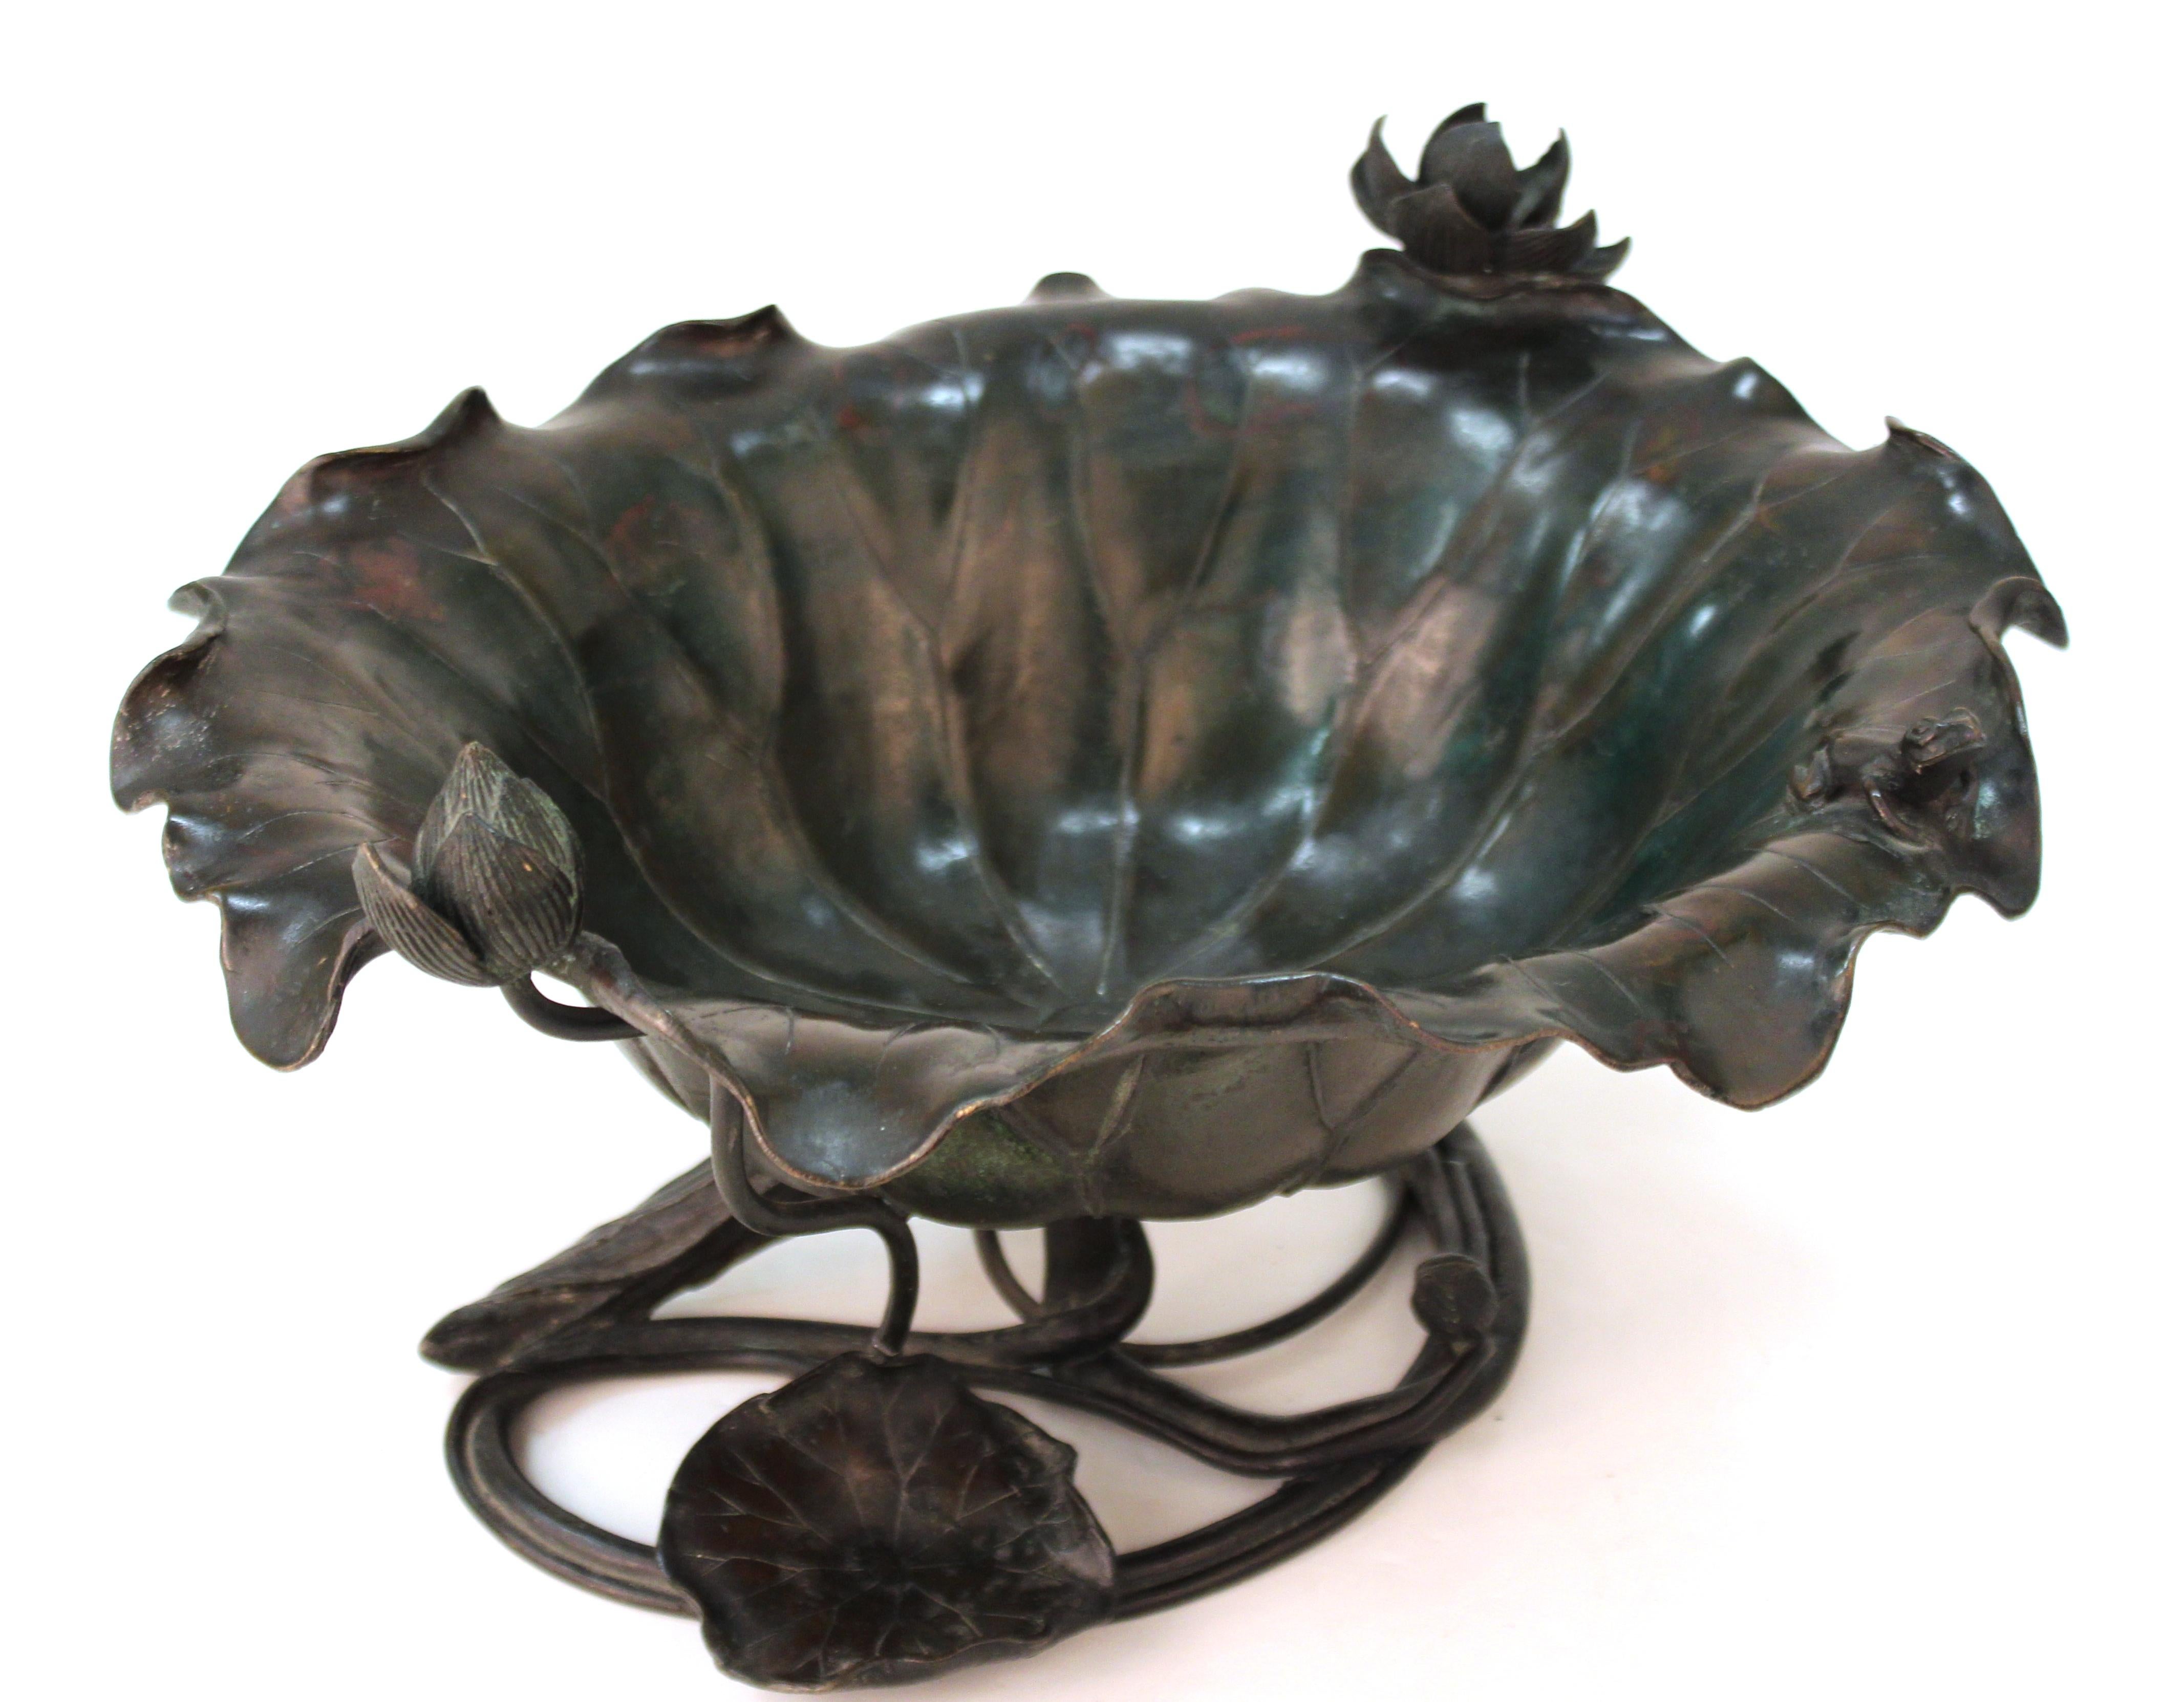 Japanese Meiji period Art Nouveau bronze ikebana vessel or decorative bowl in shape of a leaf, with a lotus flower and a sculpted frog sitting on the edge. The piece is highly detailed and was made in Japan during the 1900s. Mark on the bottom 'Made